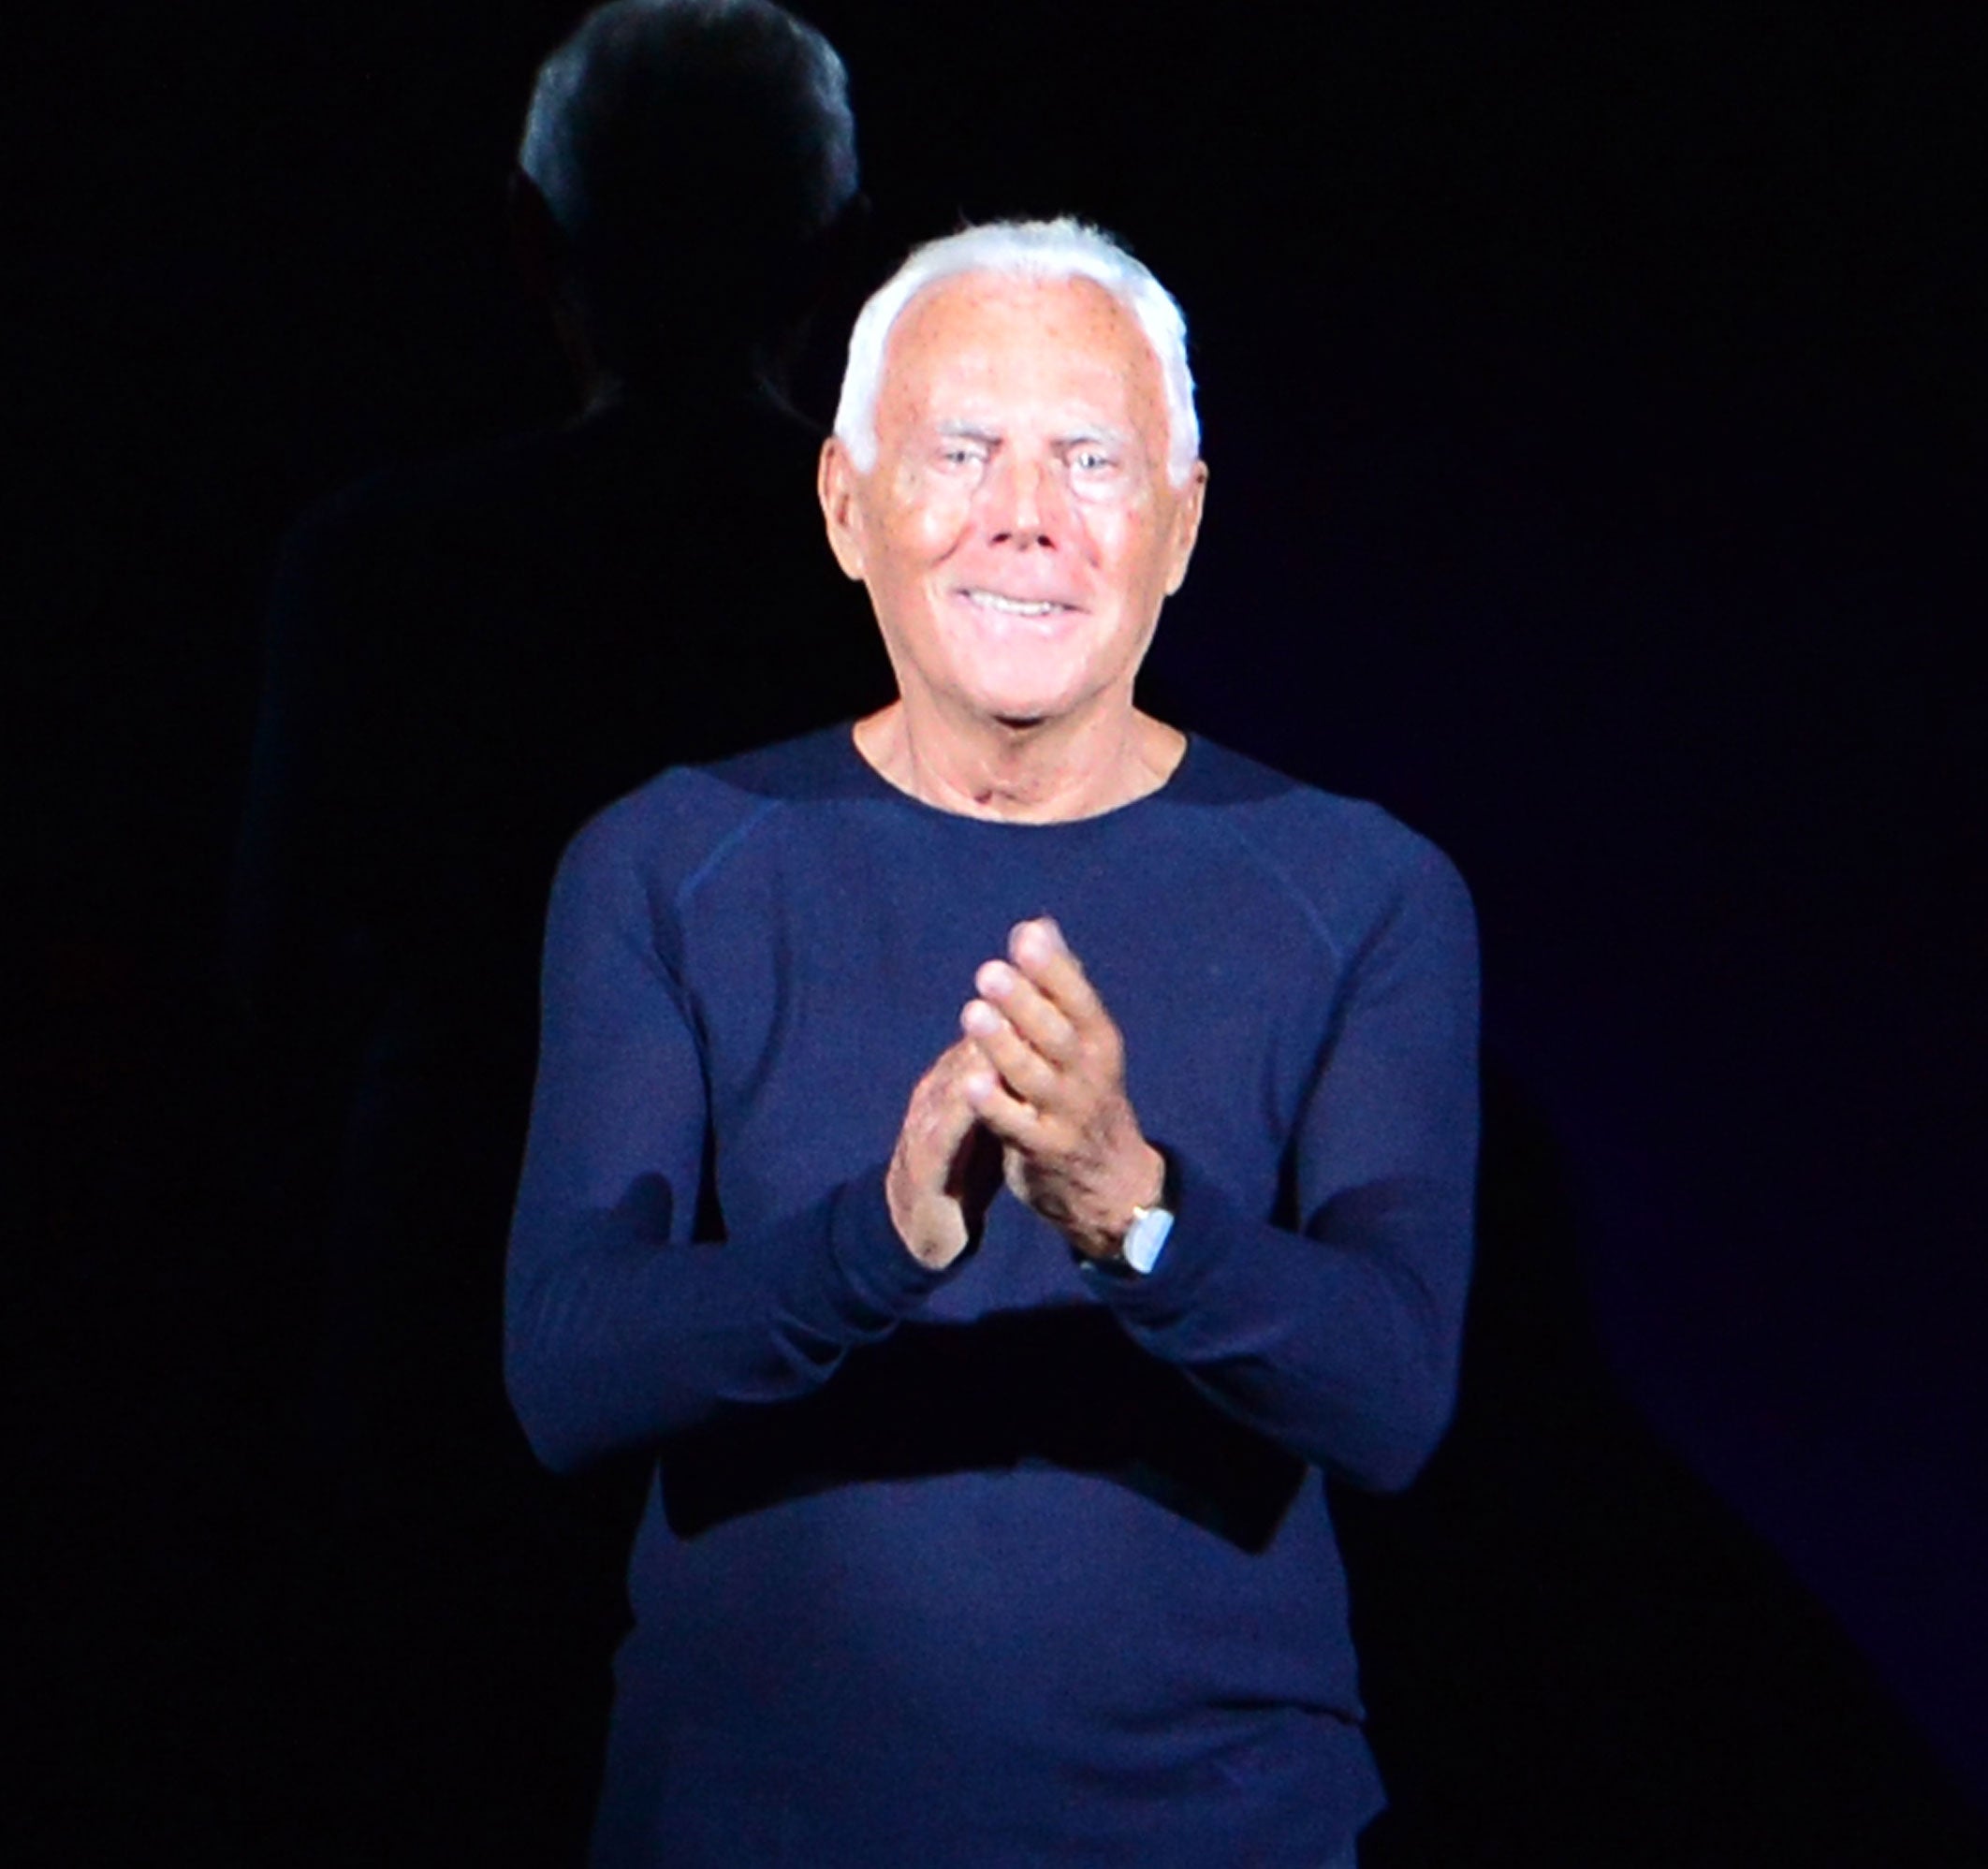 Giorgio Armani acknowledges the audience at the end of his show